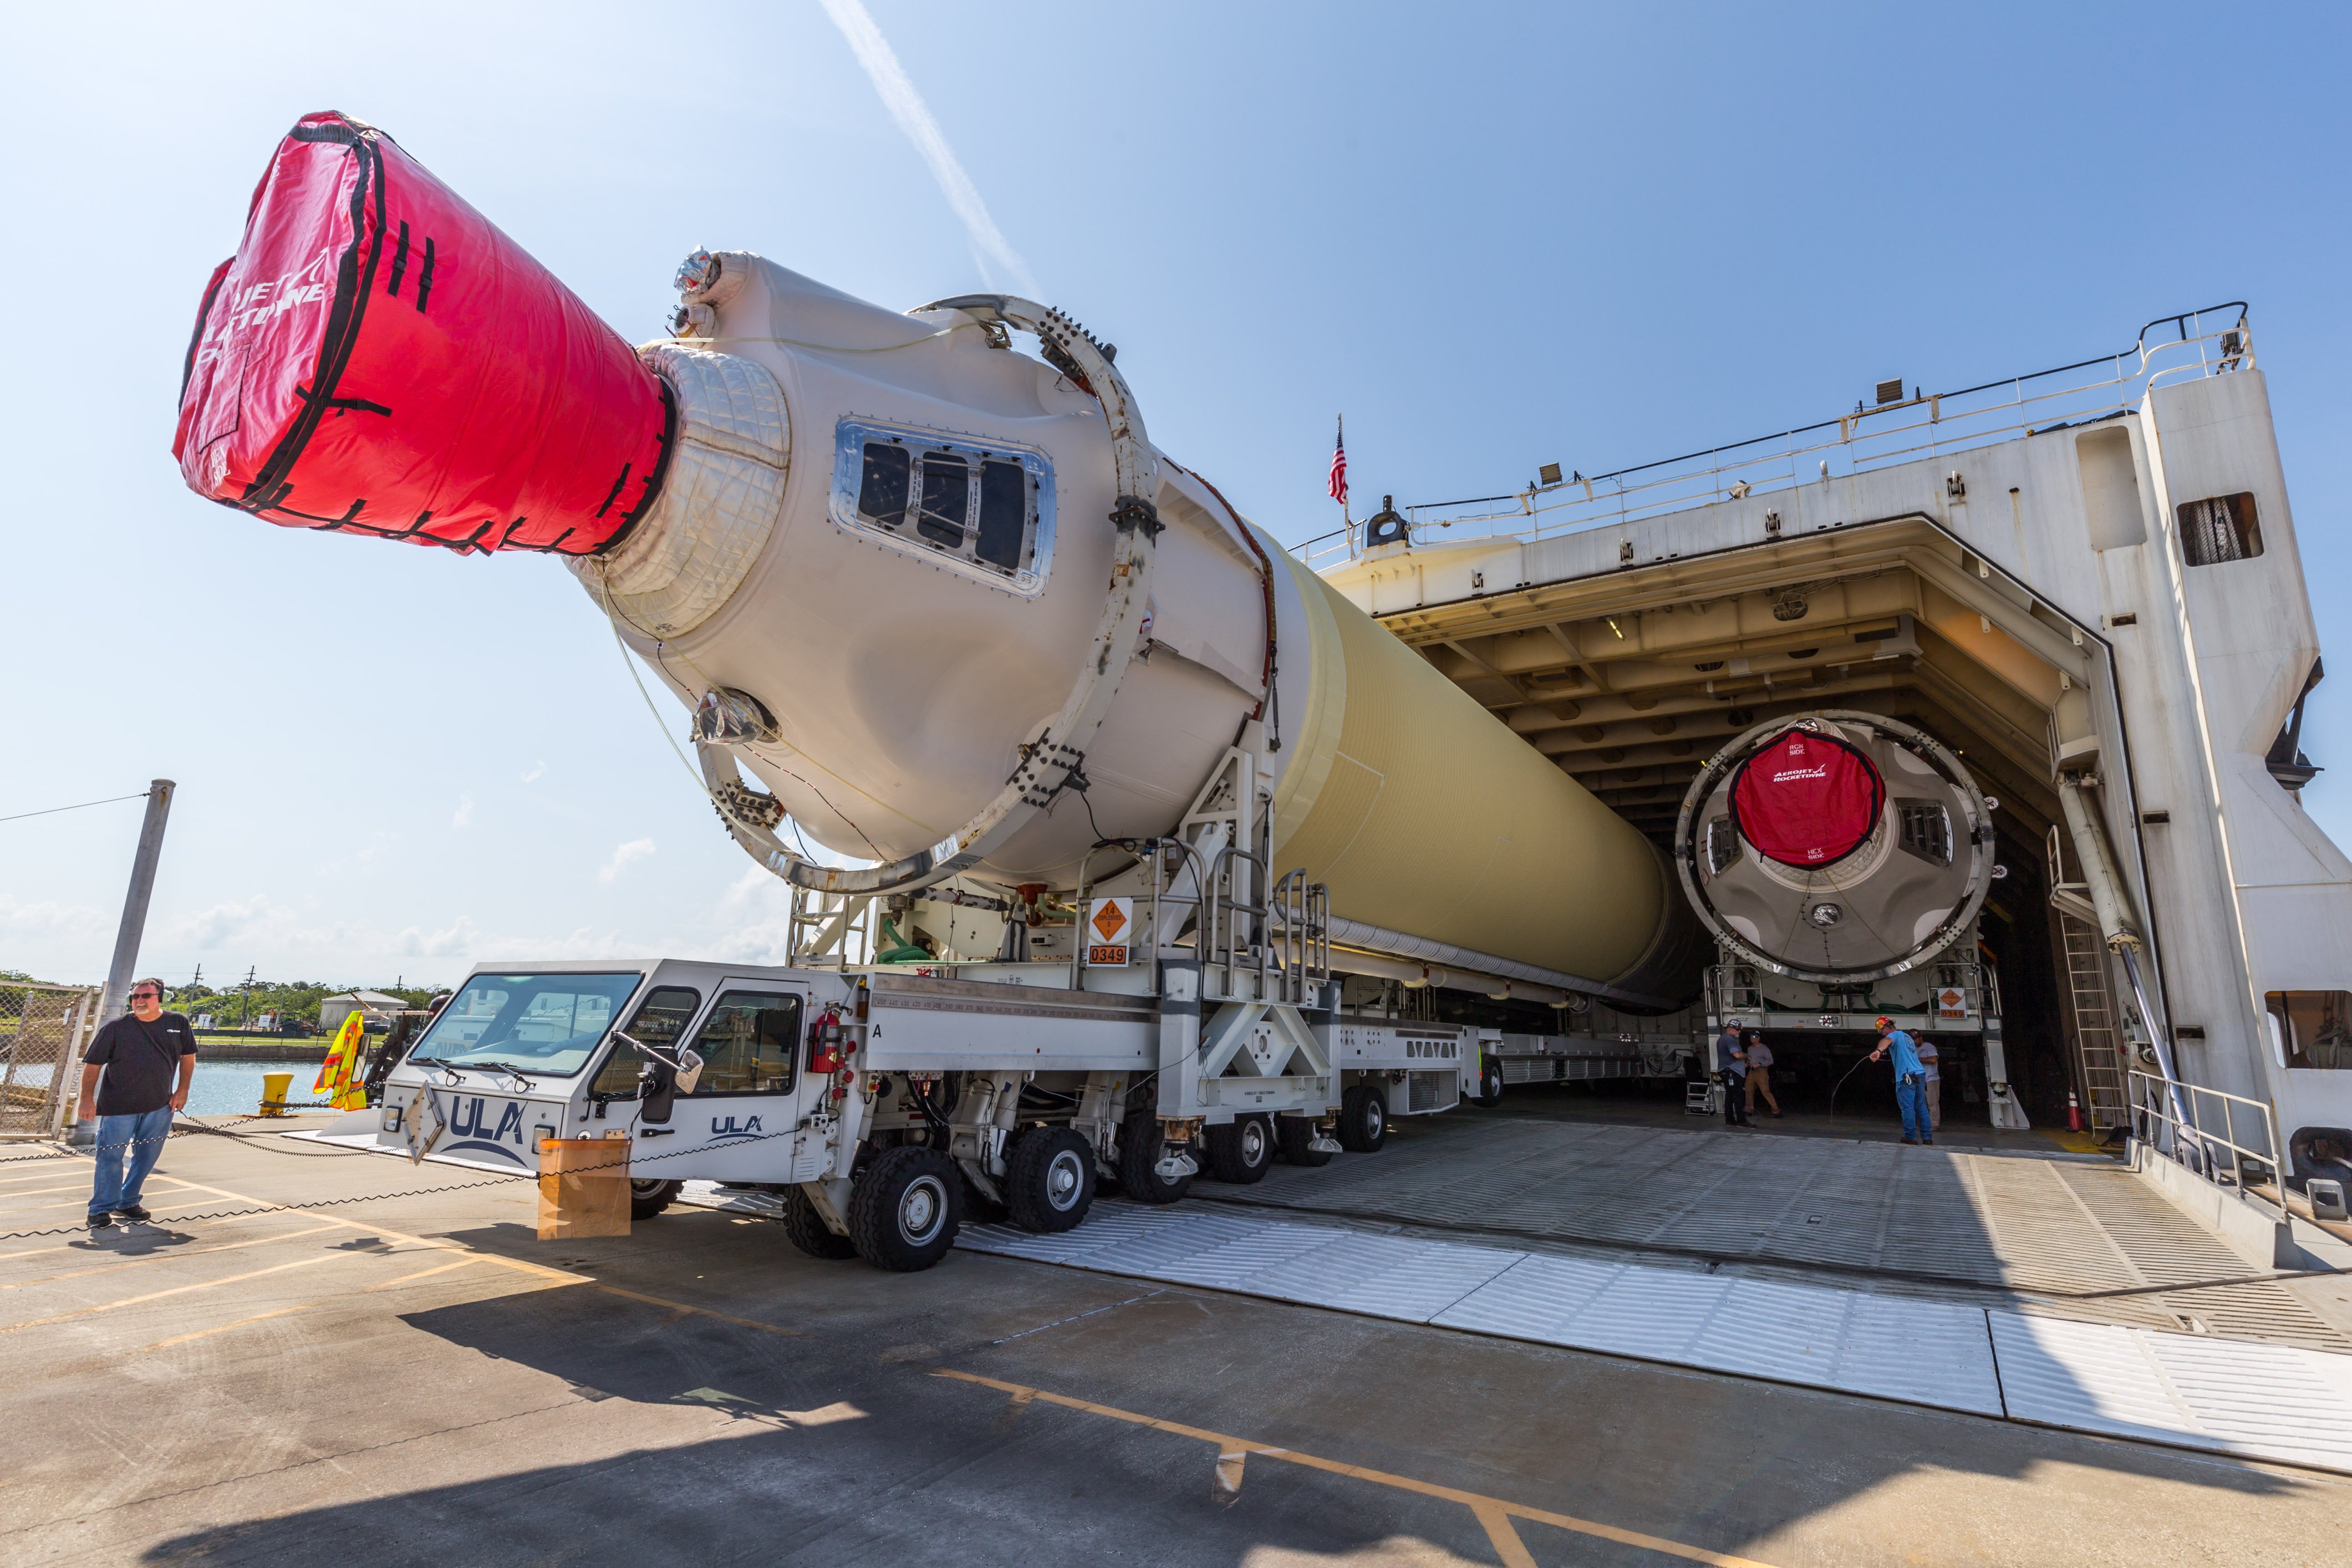 The Delta IV Heavy emerges from RocketShip at Port Canaveral. Photo by United Launch Alliance